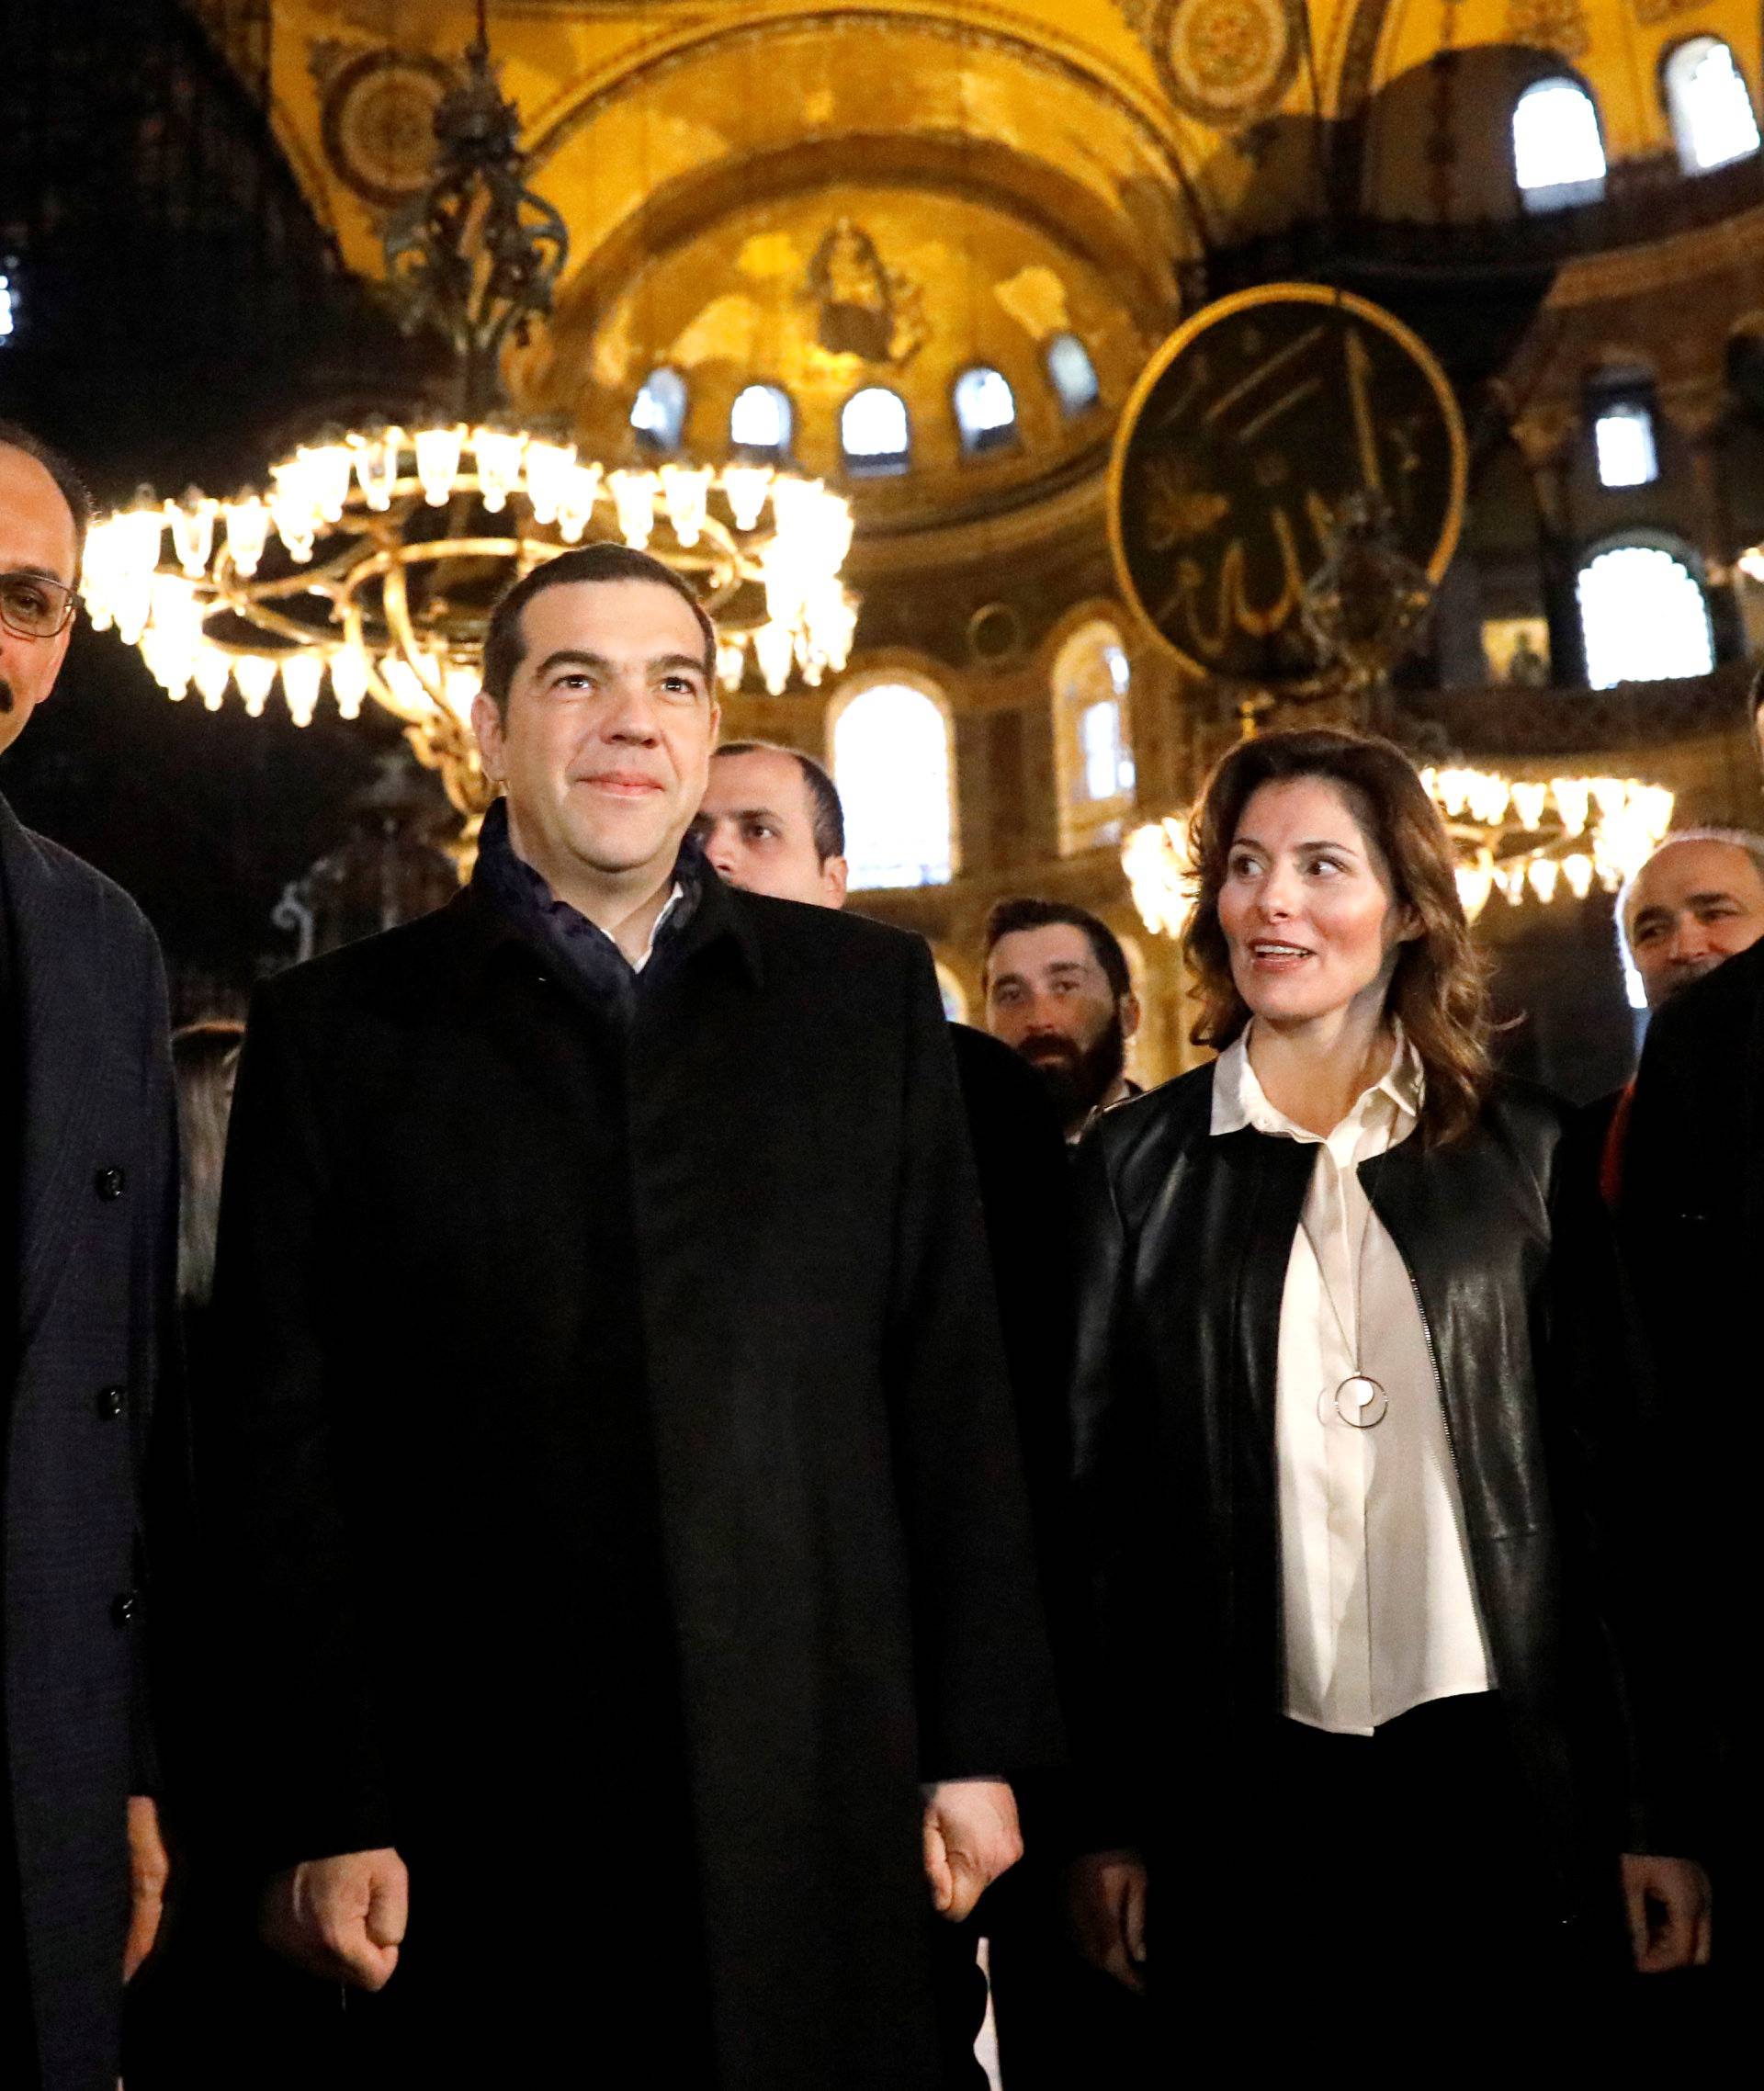 Greek PM Tsipras and Turkish officials visit the Byzantine-era monument of Hagia Sophia or Ayasofya, now a museum, in Istanbul